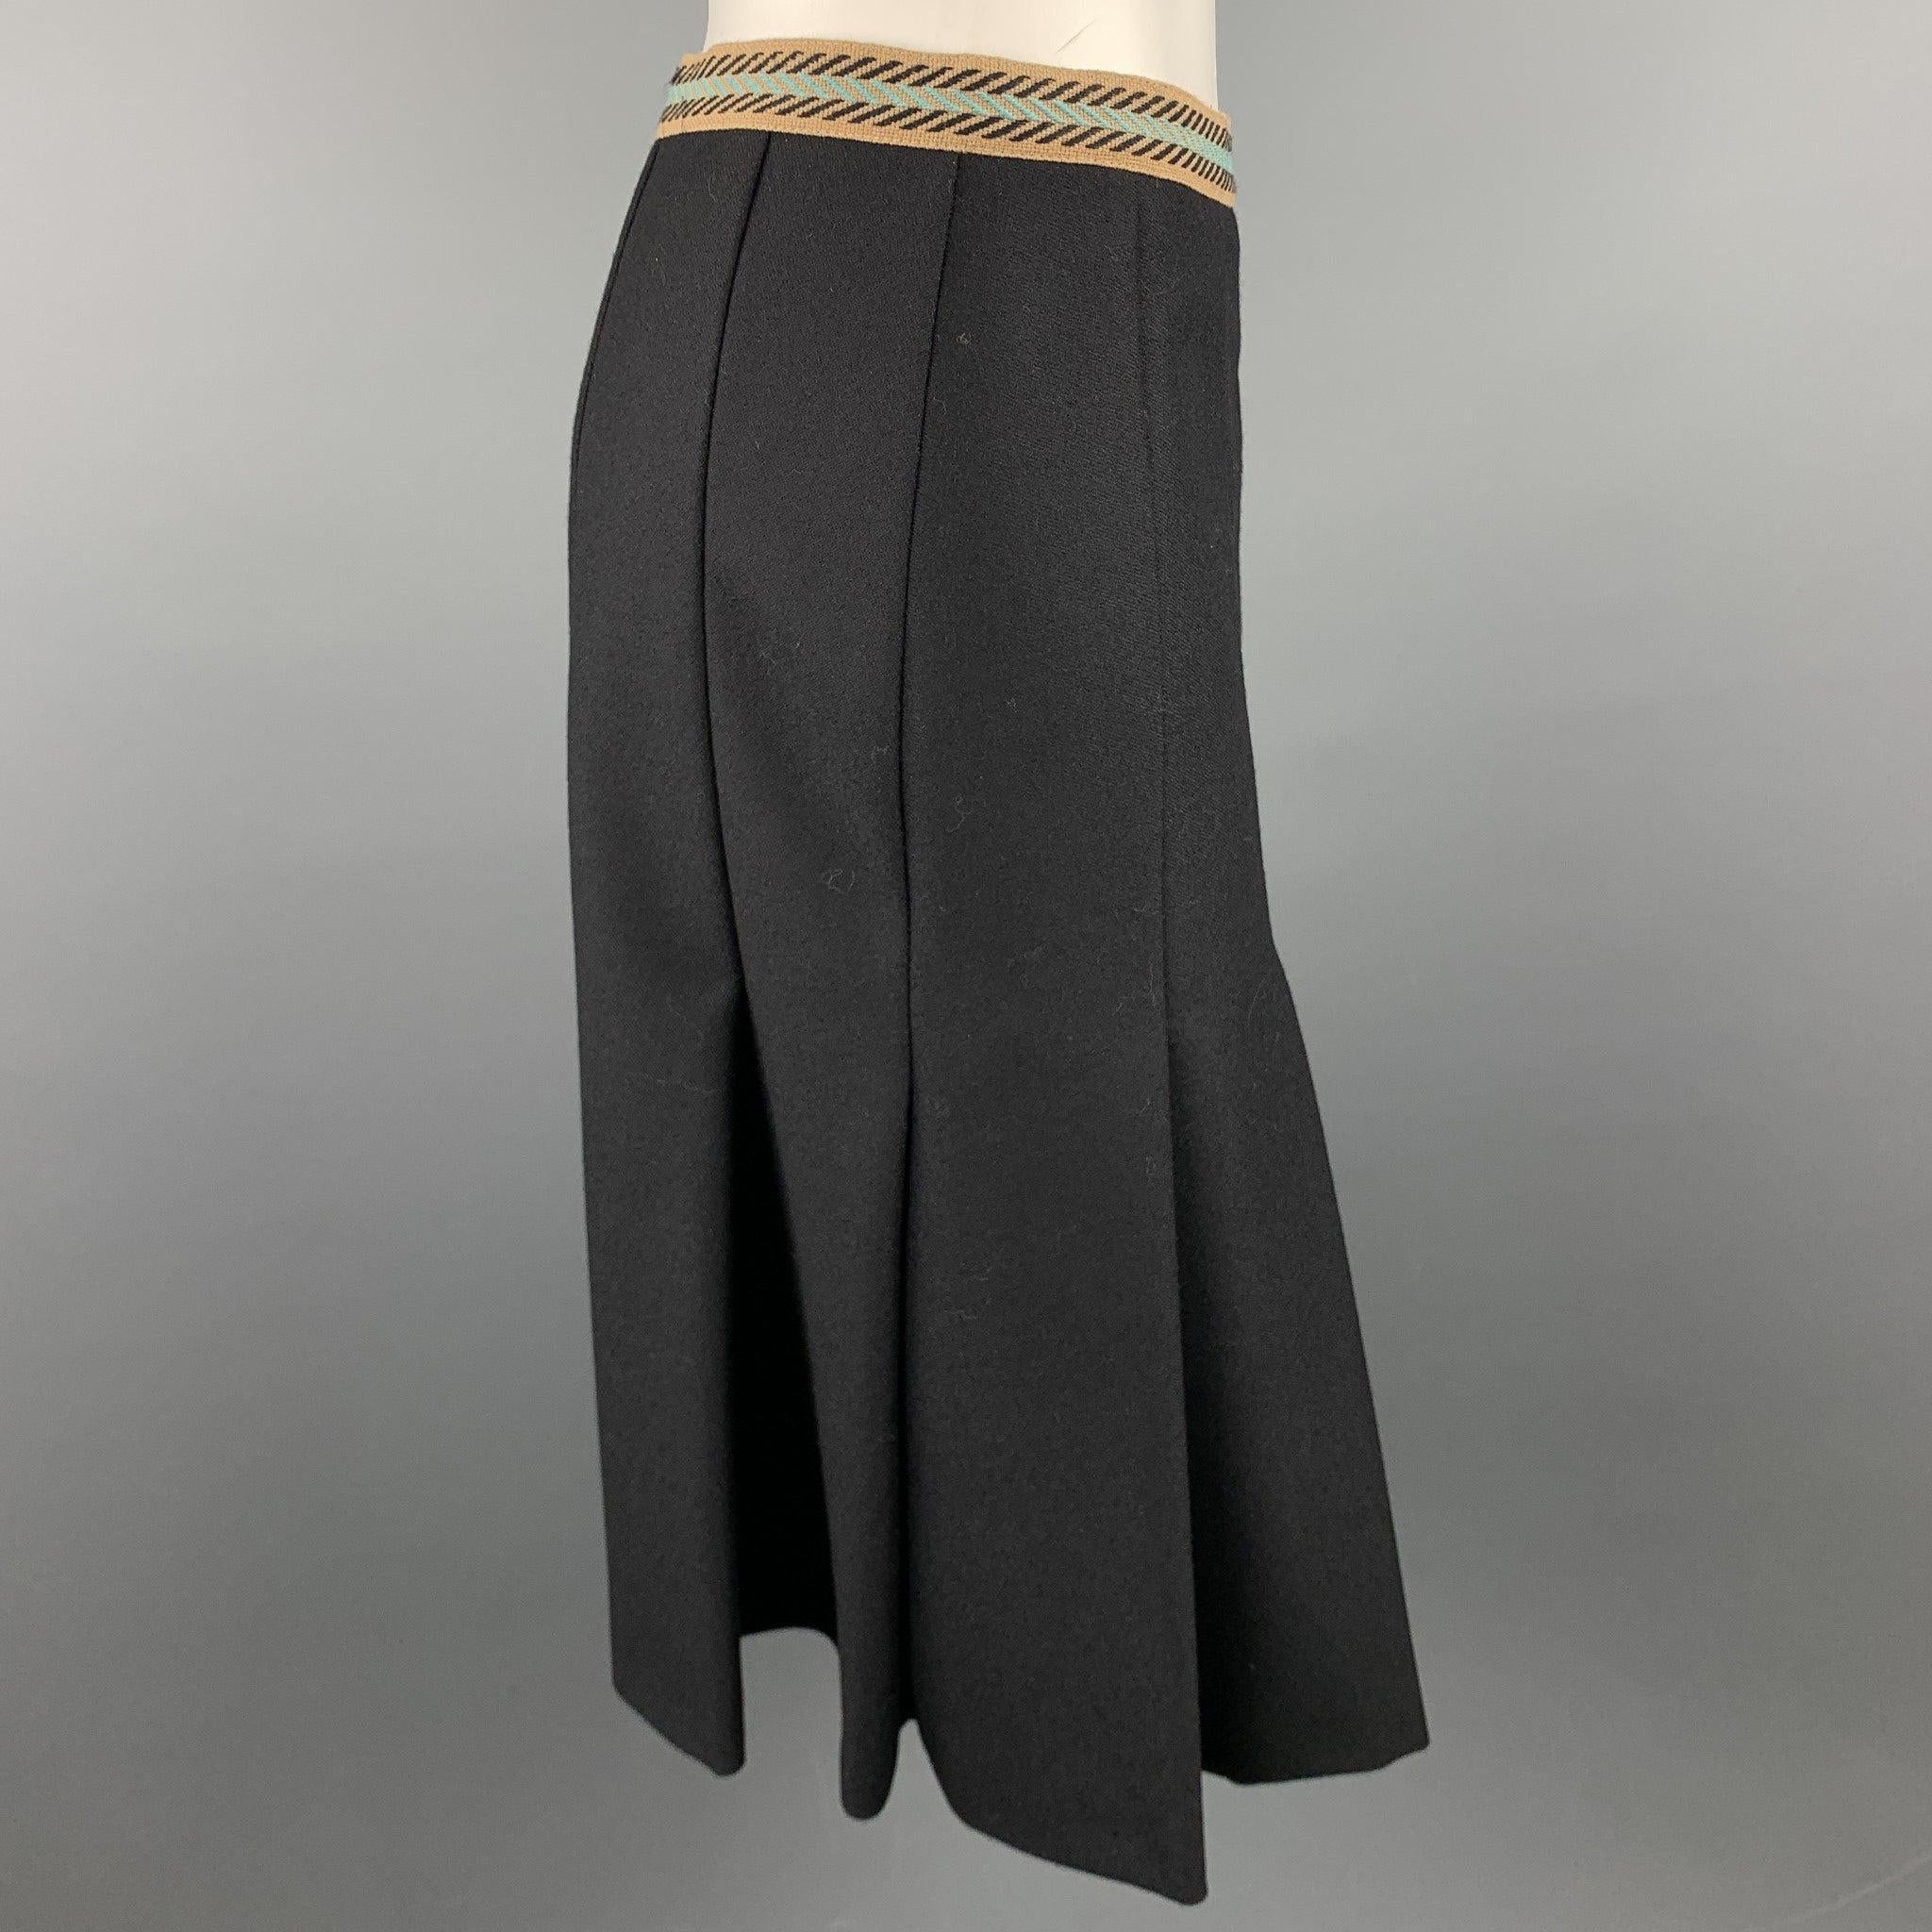 M MISSONI skirt comes in a black twill wool with a black liner featuring a pleated a-line style, ribbon waistband detail, and a side zipper closure. Made in Italy.Excellent
Pre-Owned Condition. 

Marked:   IT 42 

Measurements: 
  Waist: 28 inches